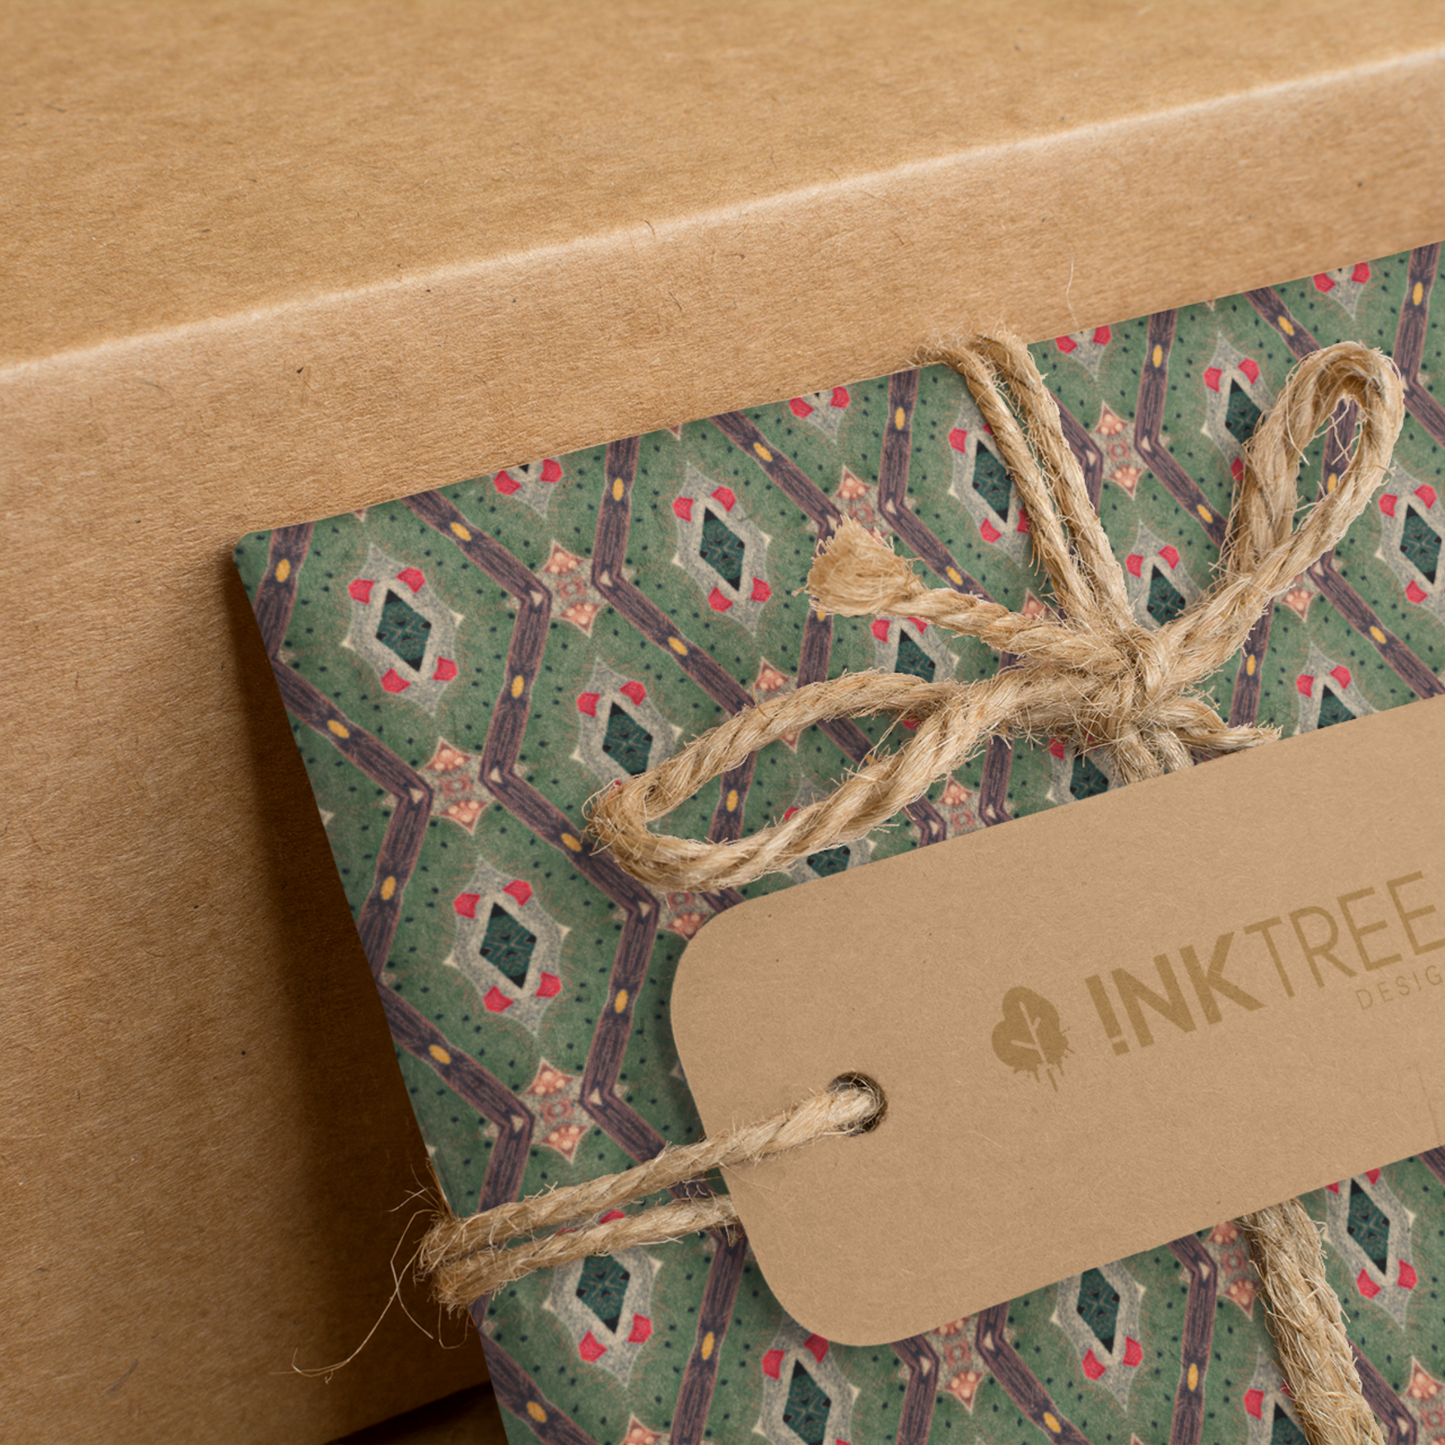 A present wrapped with a gold, black, green red and white oriental looking pattern, tied with brown string with a brown paper tag with ink tree design logo on it, leaning on a brown paper background.